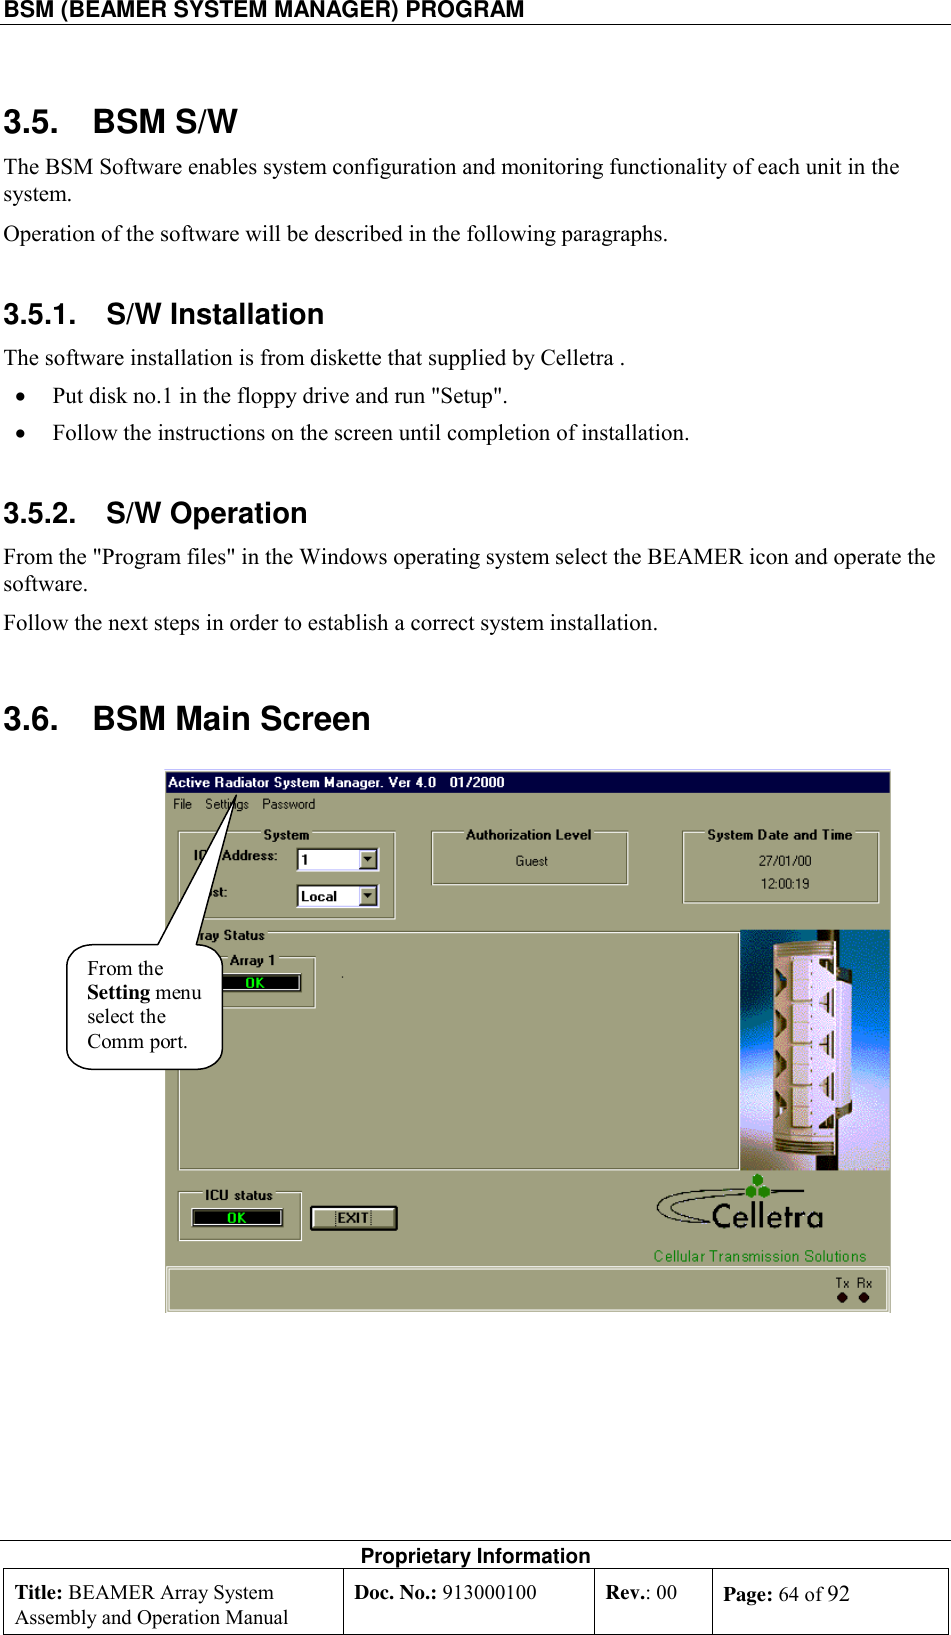 BSM (BEAMER SYSTEM MANAGER) PROGRAM    Proprietary Information Title: BEAMER Array System Assembly and Operation Manual Doc. No.: 913000100  Rev.: 00  Page: 64 of 92  3.5. BSM S/W The BSM Software enables system configuration and monitoring functionality of each unit in the system. Operation of the software will be described in the following paragraphs. 3.5.1. S/W Installation The software installation is from diskette that supplied by Celletra . •  Put disk no.1 in the floppy drive and run &quot;Setup&quot;. •  Follow the instructions on the screen until completion of installation. 3.5.2. S/W Operation From the &quot;Program files&quot; in the Windows operating system select the BEAMER icon and operate the software. Follow the next steps in order to establish a correct system installation. 3.6.  BSM Main Screen From theSetting menuselect theComm port.  